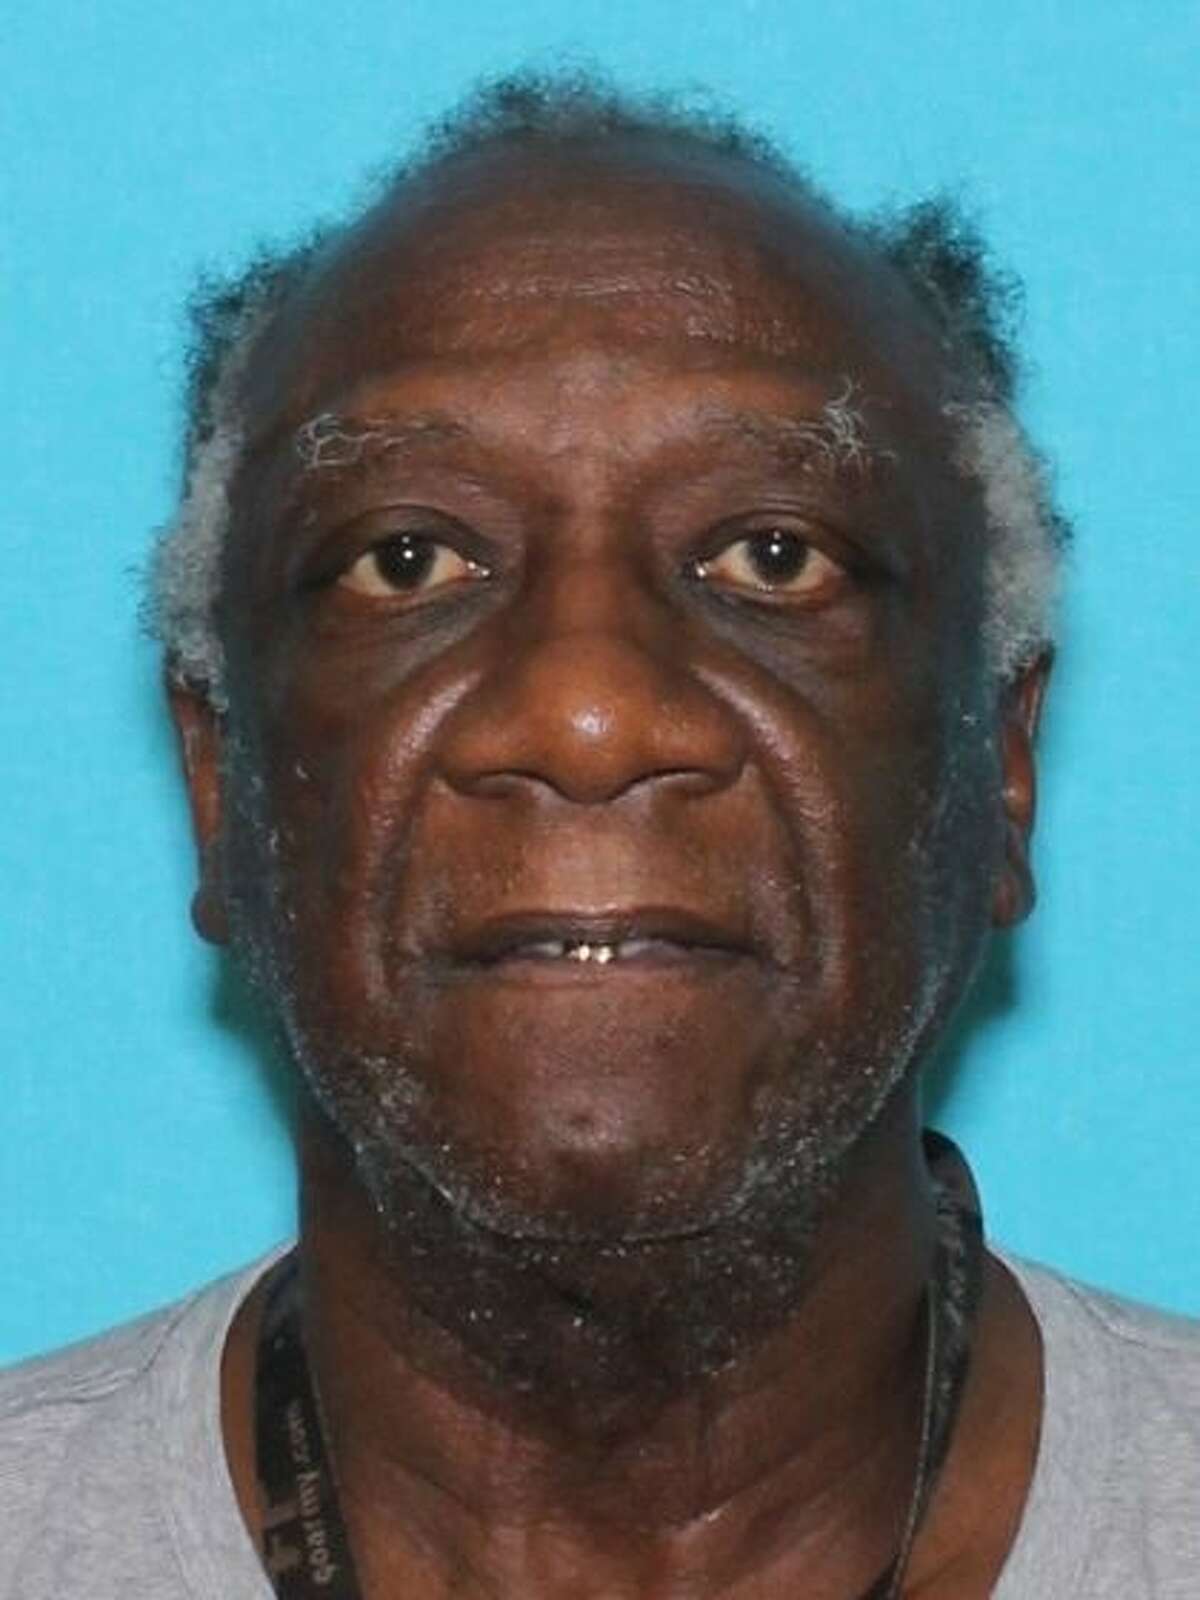 Oliver London Jr., 72, was found dead in his home on June 23, 2019. Police are looking for information on a woman who may be connected to his death.